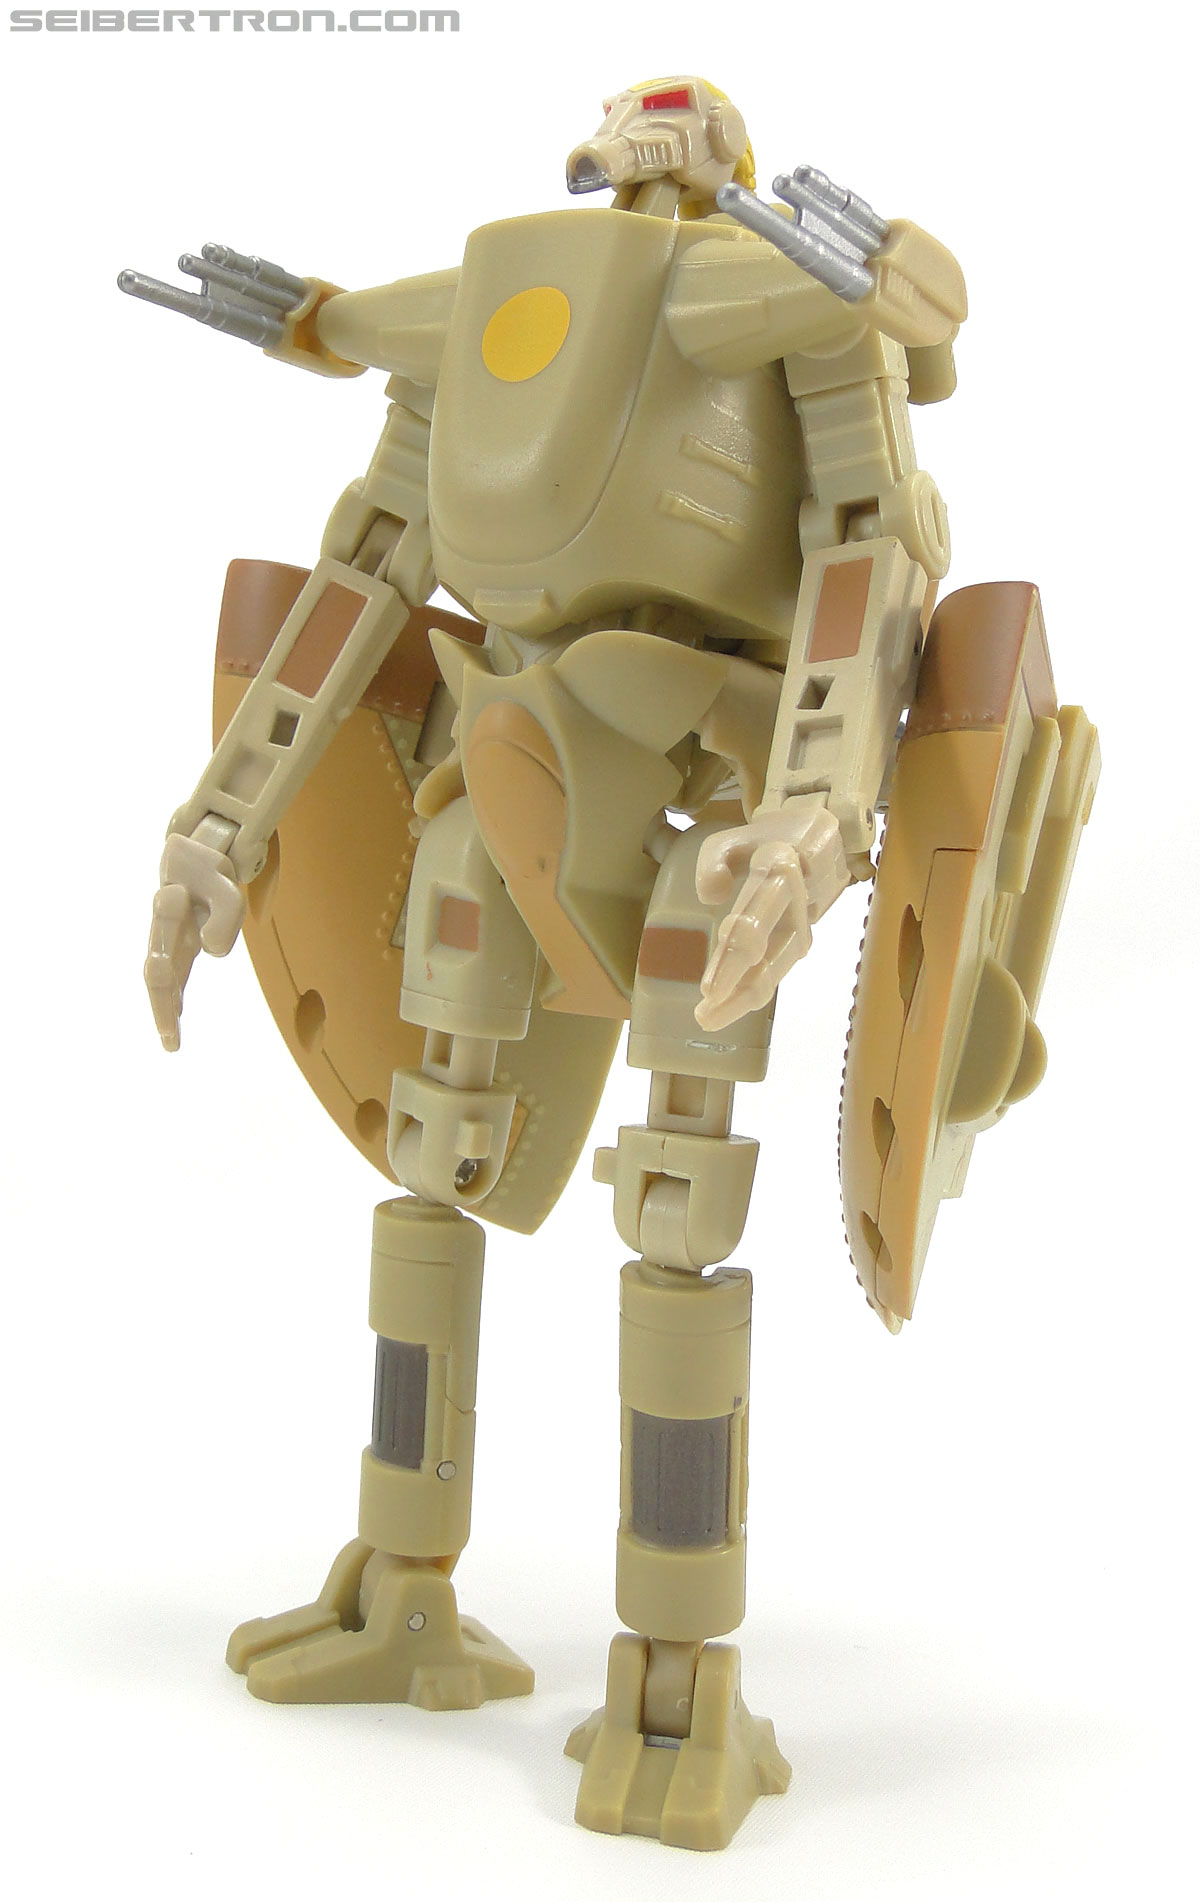 Star Wars Transformers Battle Droid Commader (Armored Assault Tank) (Battle Droid Commader) (Image #47 of 85)